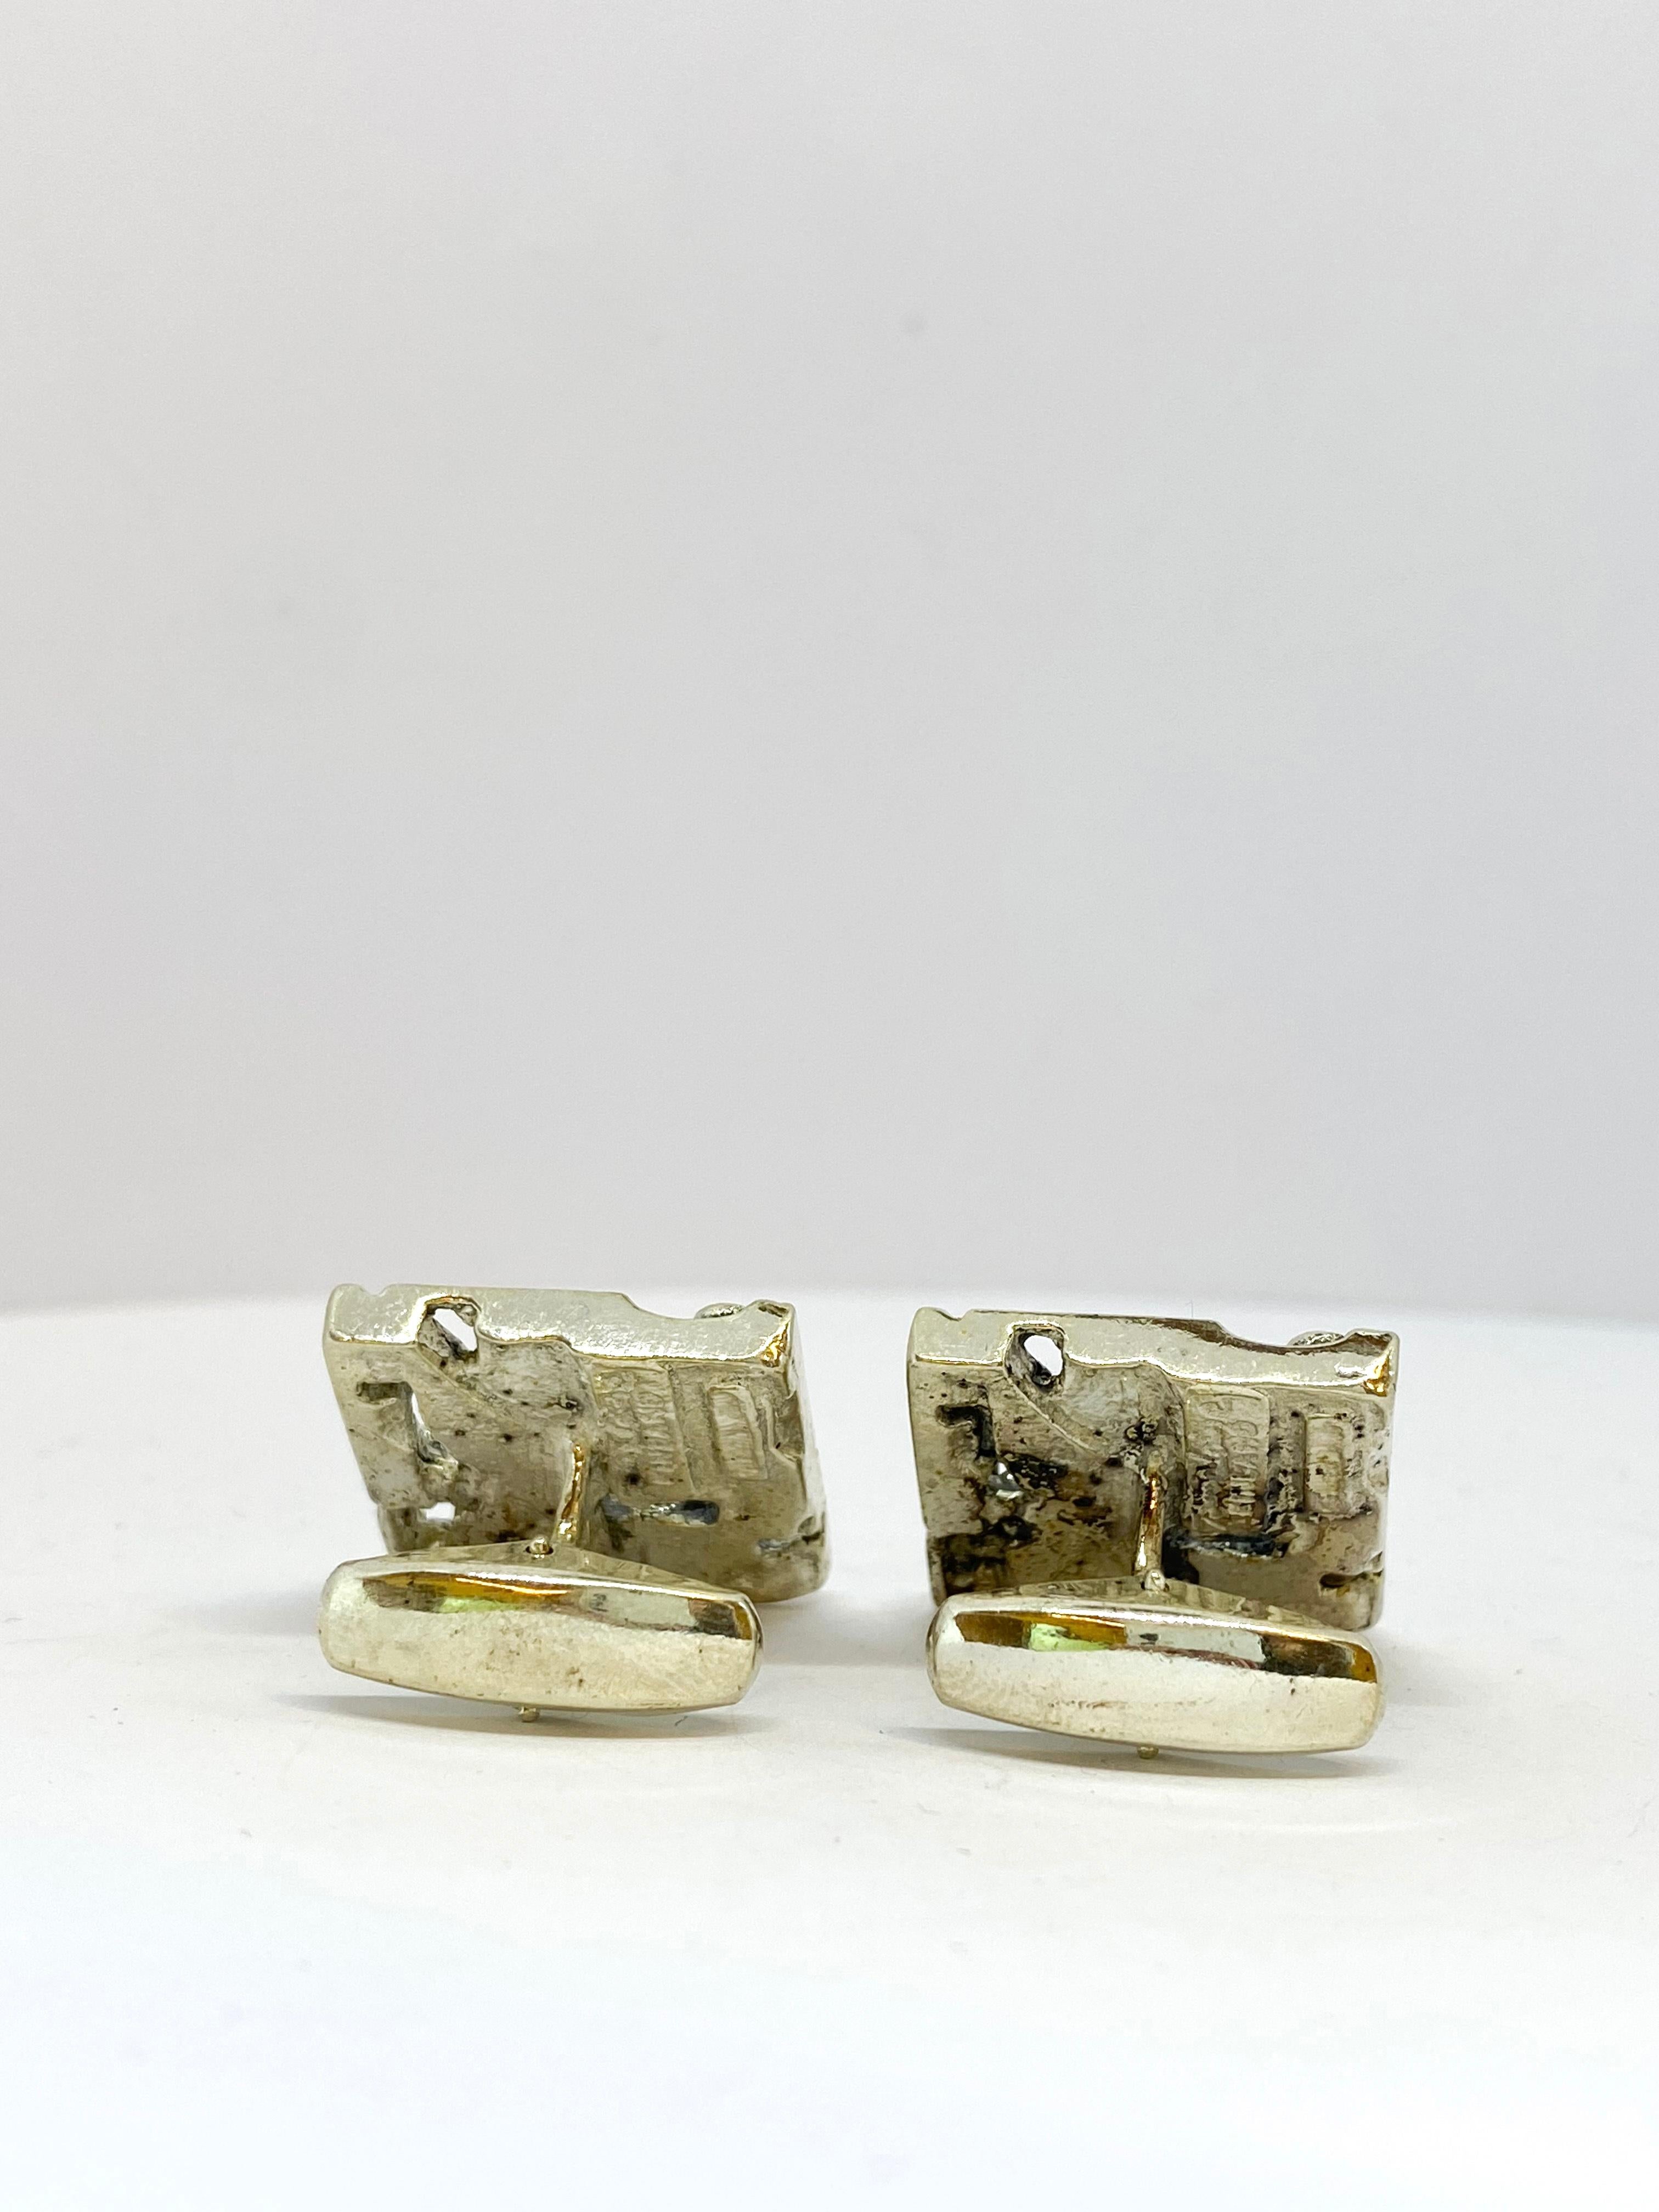 Silver Jorma Laine Turun Hopea 1976 Cufflinks
830 Silver.
Made in Finland Turun Hopea.

Jorma Laine (1930-2002) was a Finnish jewelry designer, whose work in bronze and silver (more seldom gold) is easily recognizable. He developed a style of his